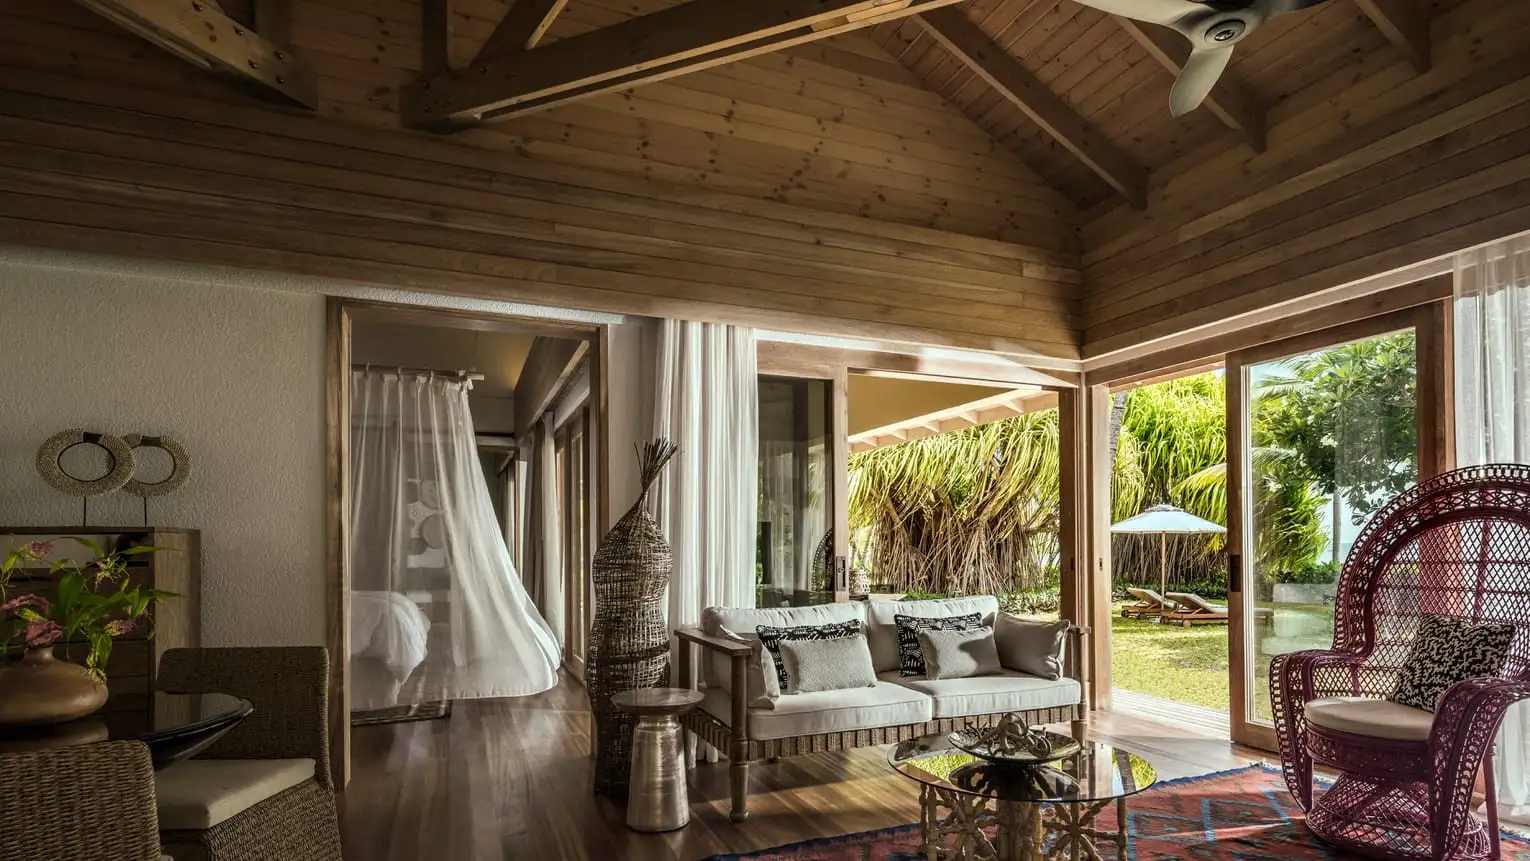 Indulge in the allure of our intimate rustic villas and suites, each serving as a private retreat that will transport you into the enchanting world of a fortunate castaway here at Four Seasons Resort at Desroches Island.